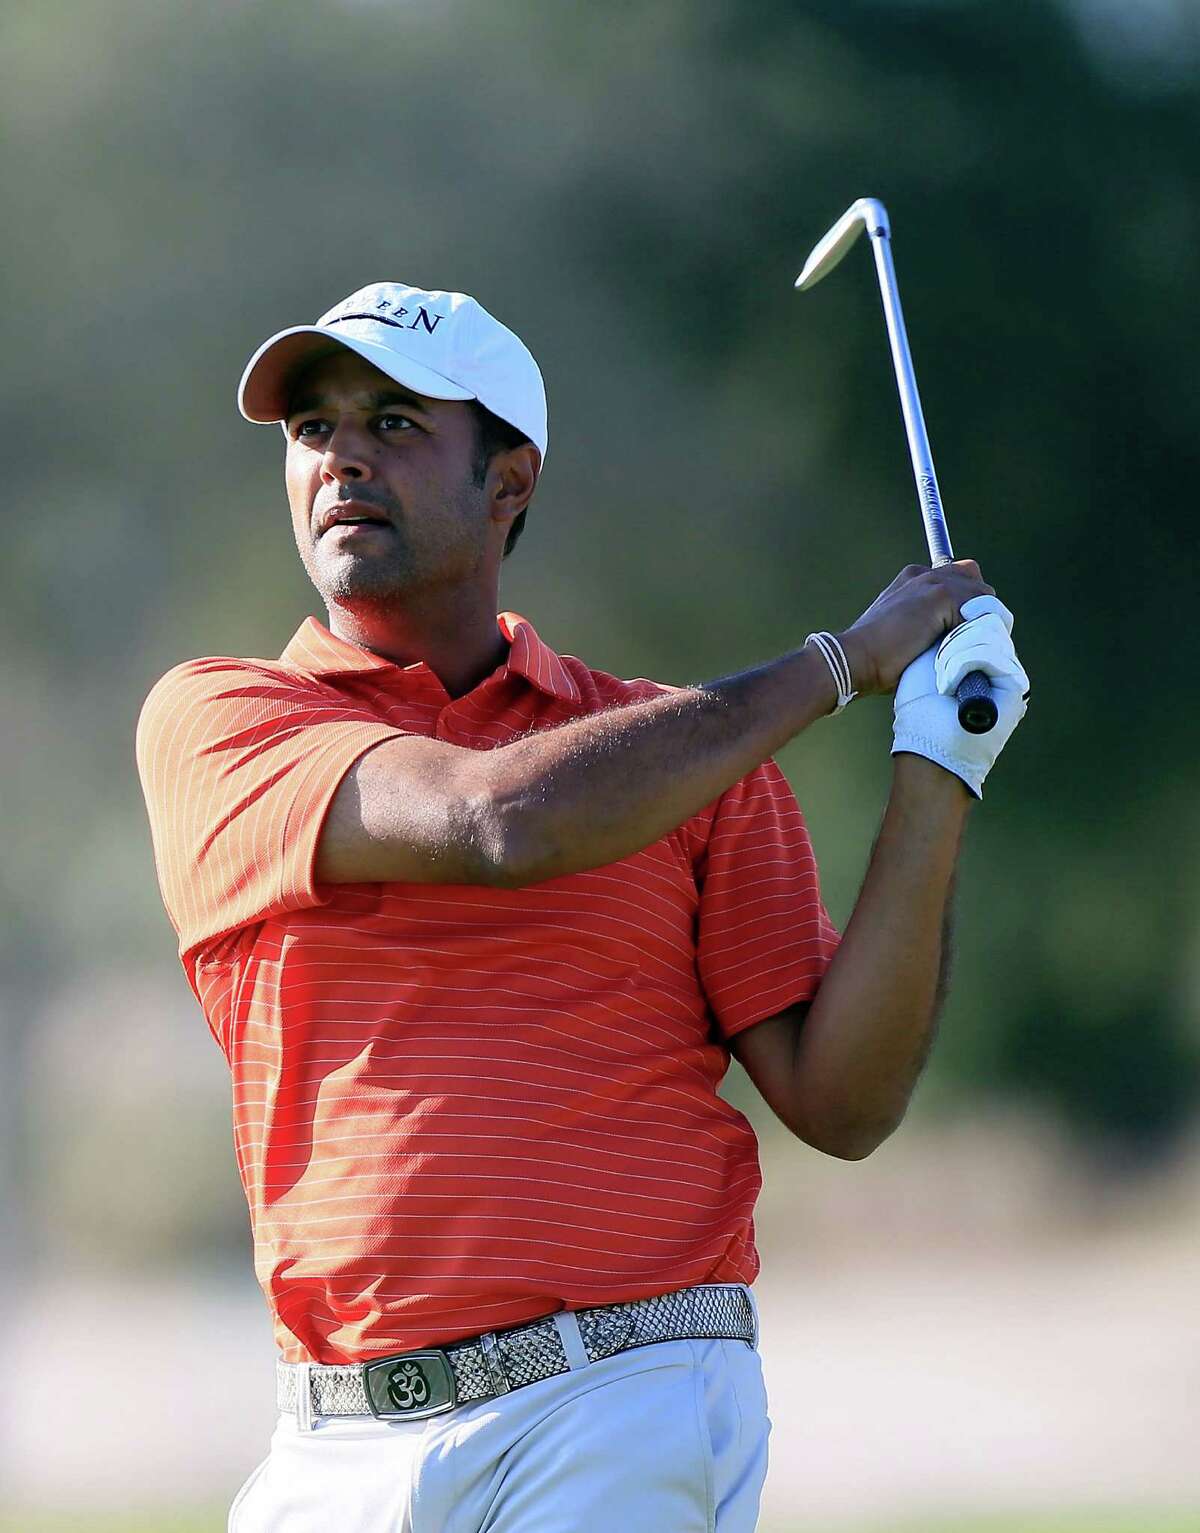 Arjun Atwal, who is in danger of losing his card, held on to a one-stroke lead in the McGladrey Classic.